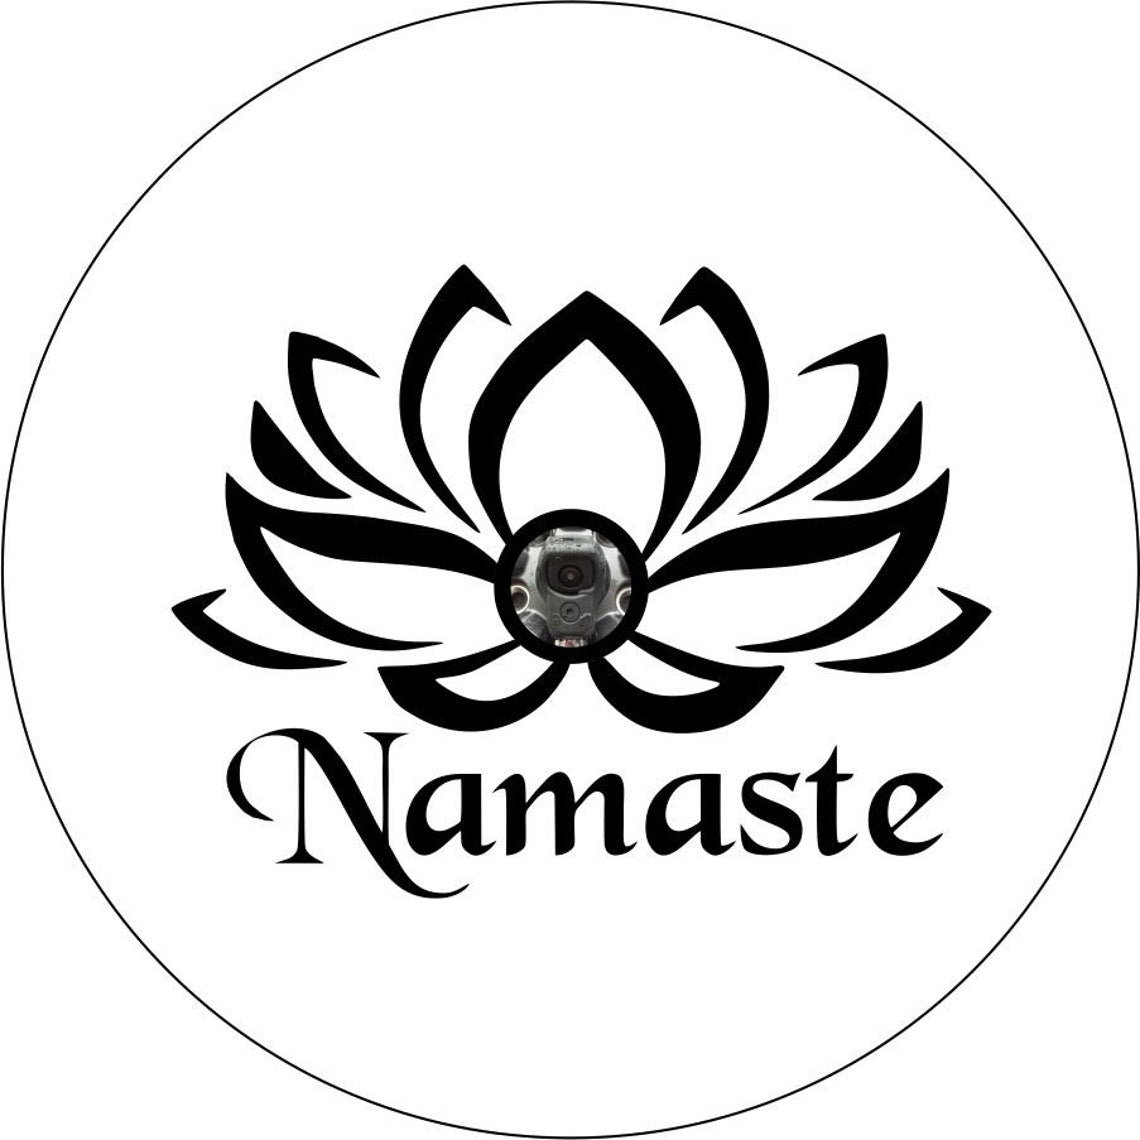 Namaste Lotus Flower - ANY COLOR